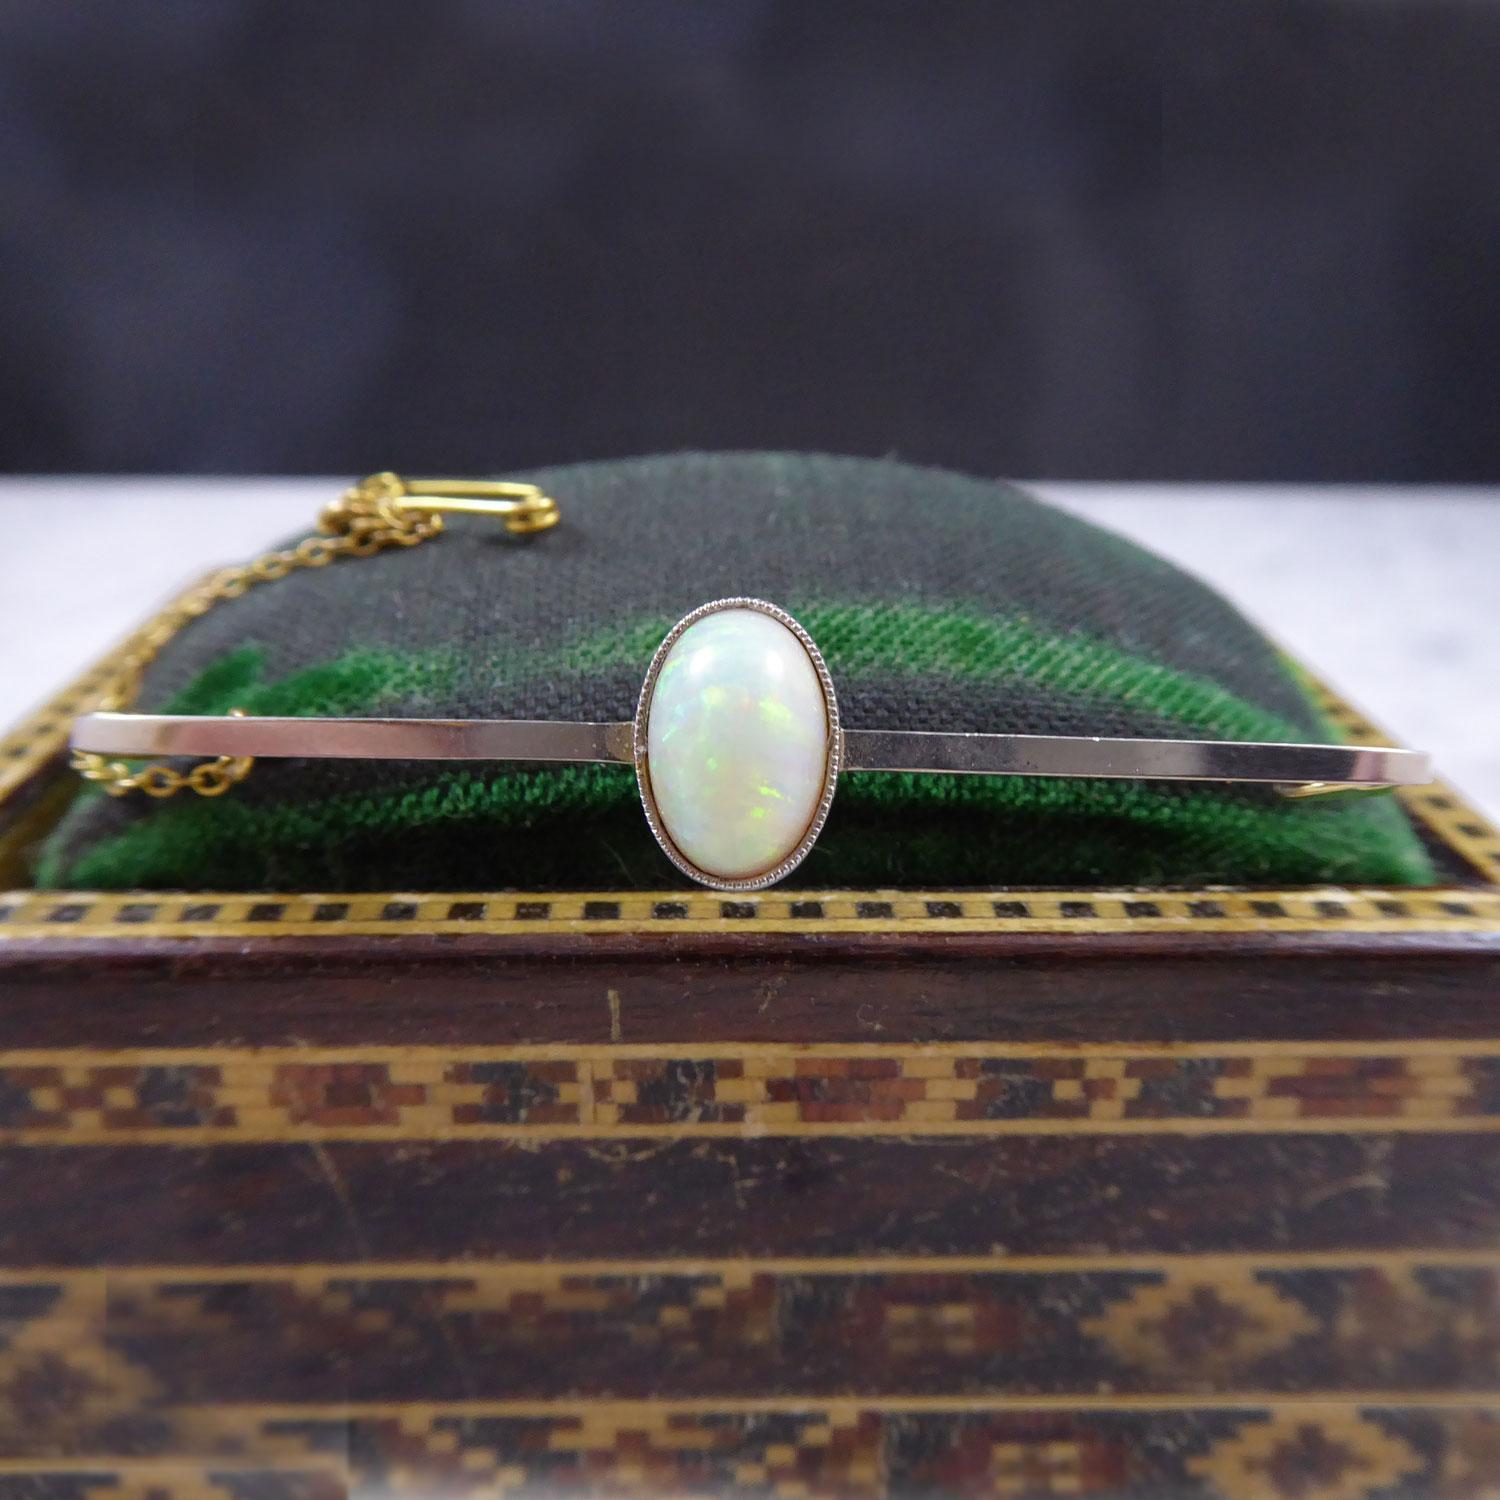 A neat and simply styled bar brooch, the mainstay of many a classic wardrobe.  This lovely example dates from the Edwardian era and features a cabochon cut opal white in colour and with flashes of turquoise and shades of orange througout.  The opal